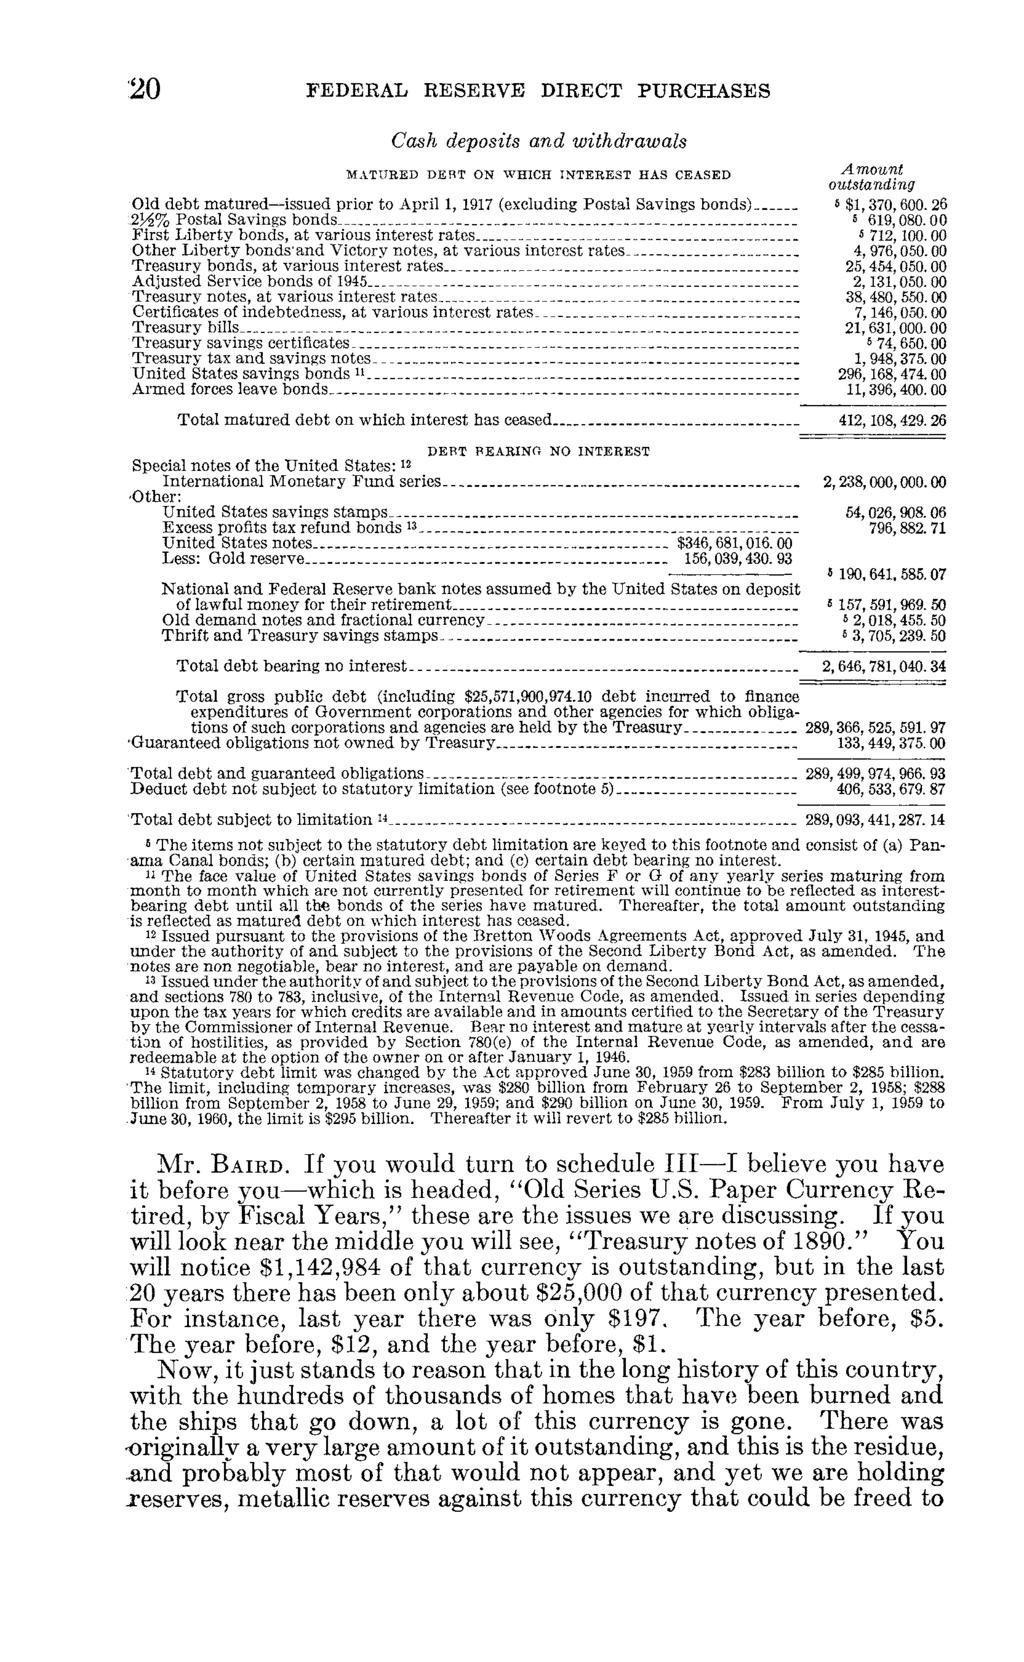 20 FEDERAL RESERVE DIRECT PURCHASES Cash deposits and withdrawals MATURED DEBT ON WHICH INTEREST HAS CEASED AmOUJlt outstanding Old debt matured issued prior to April 1, 1917 (excluding Postal